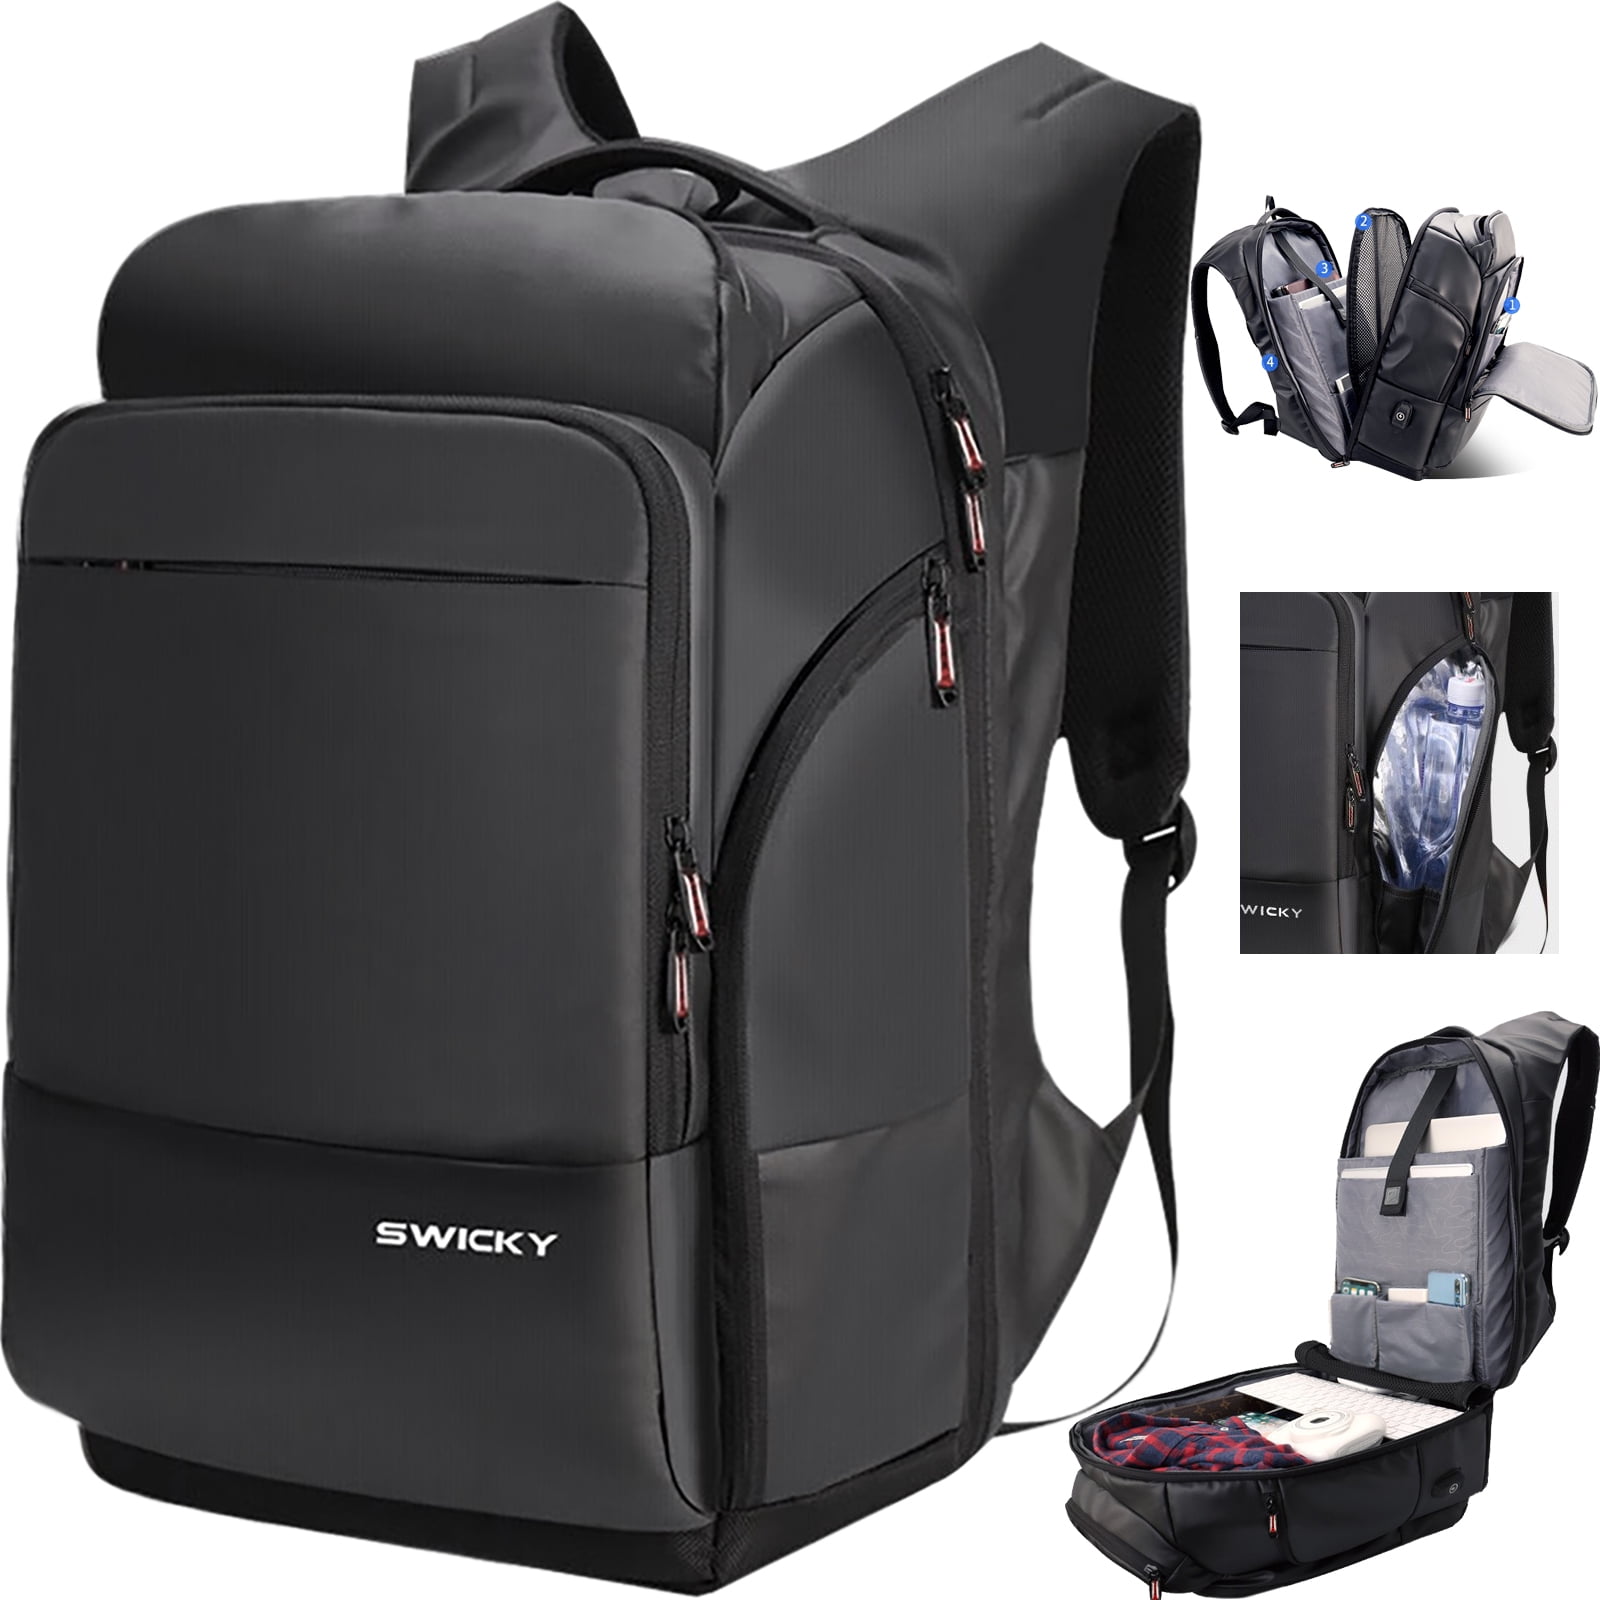 Laptop Backpack for Travel, 17.3 inch Anti-Theft Business Backpack for Women with USB Charging Port and Side Insulation TSA Friendly, Gifts - Walmart.com